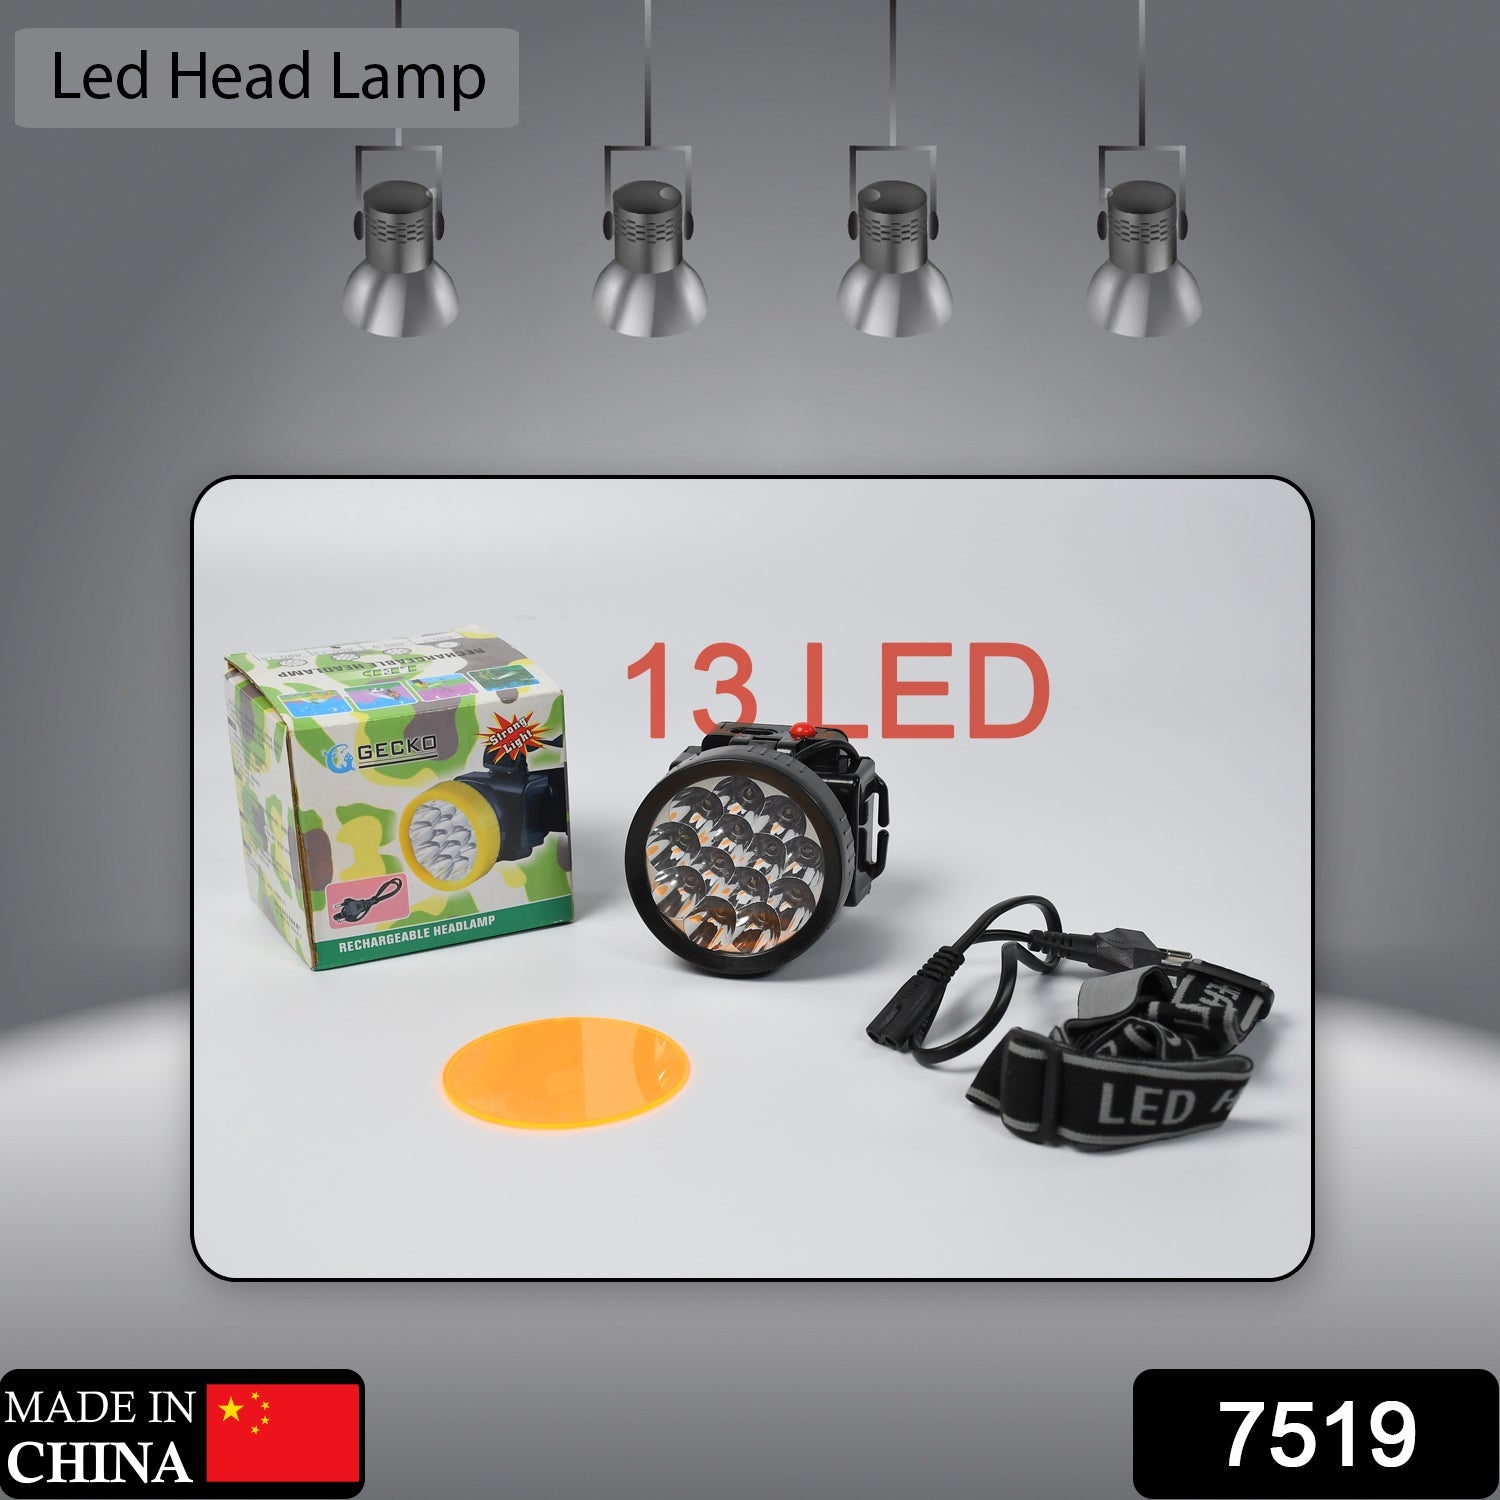 7519 HEAD LAMP 13 LED LONG RANGE RECHARGEABLE HEADLAMP ADJUSTMENT LAMP USE FOR FARMERS, FISHING, CAMPING, HIKING, TREKKING, CYCLING 